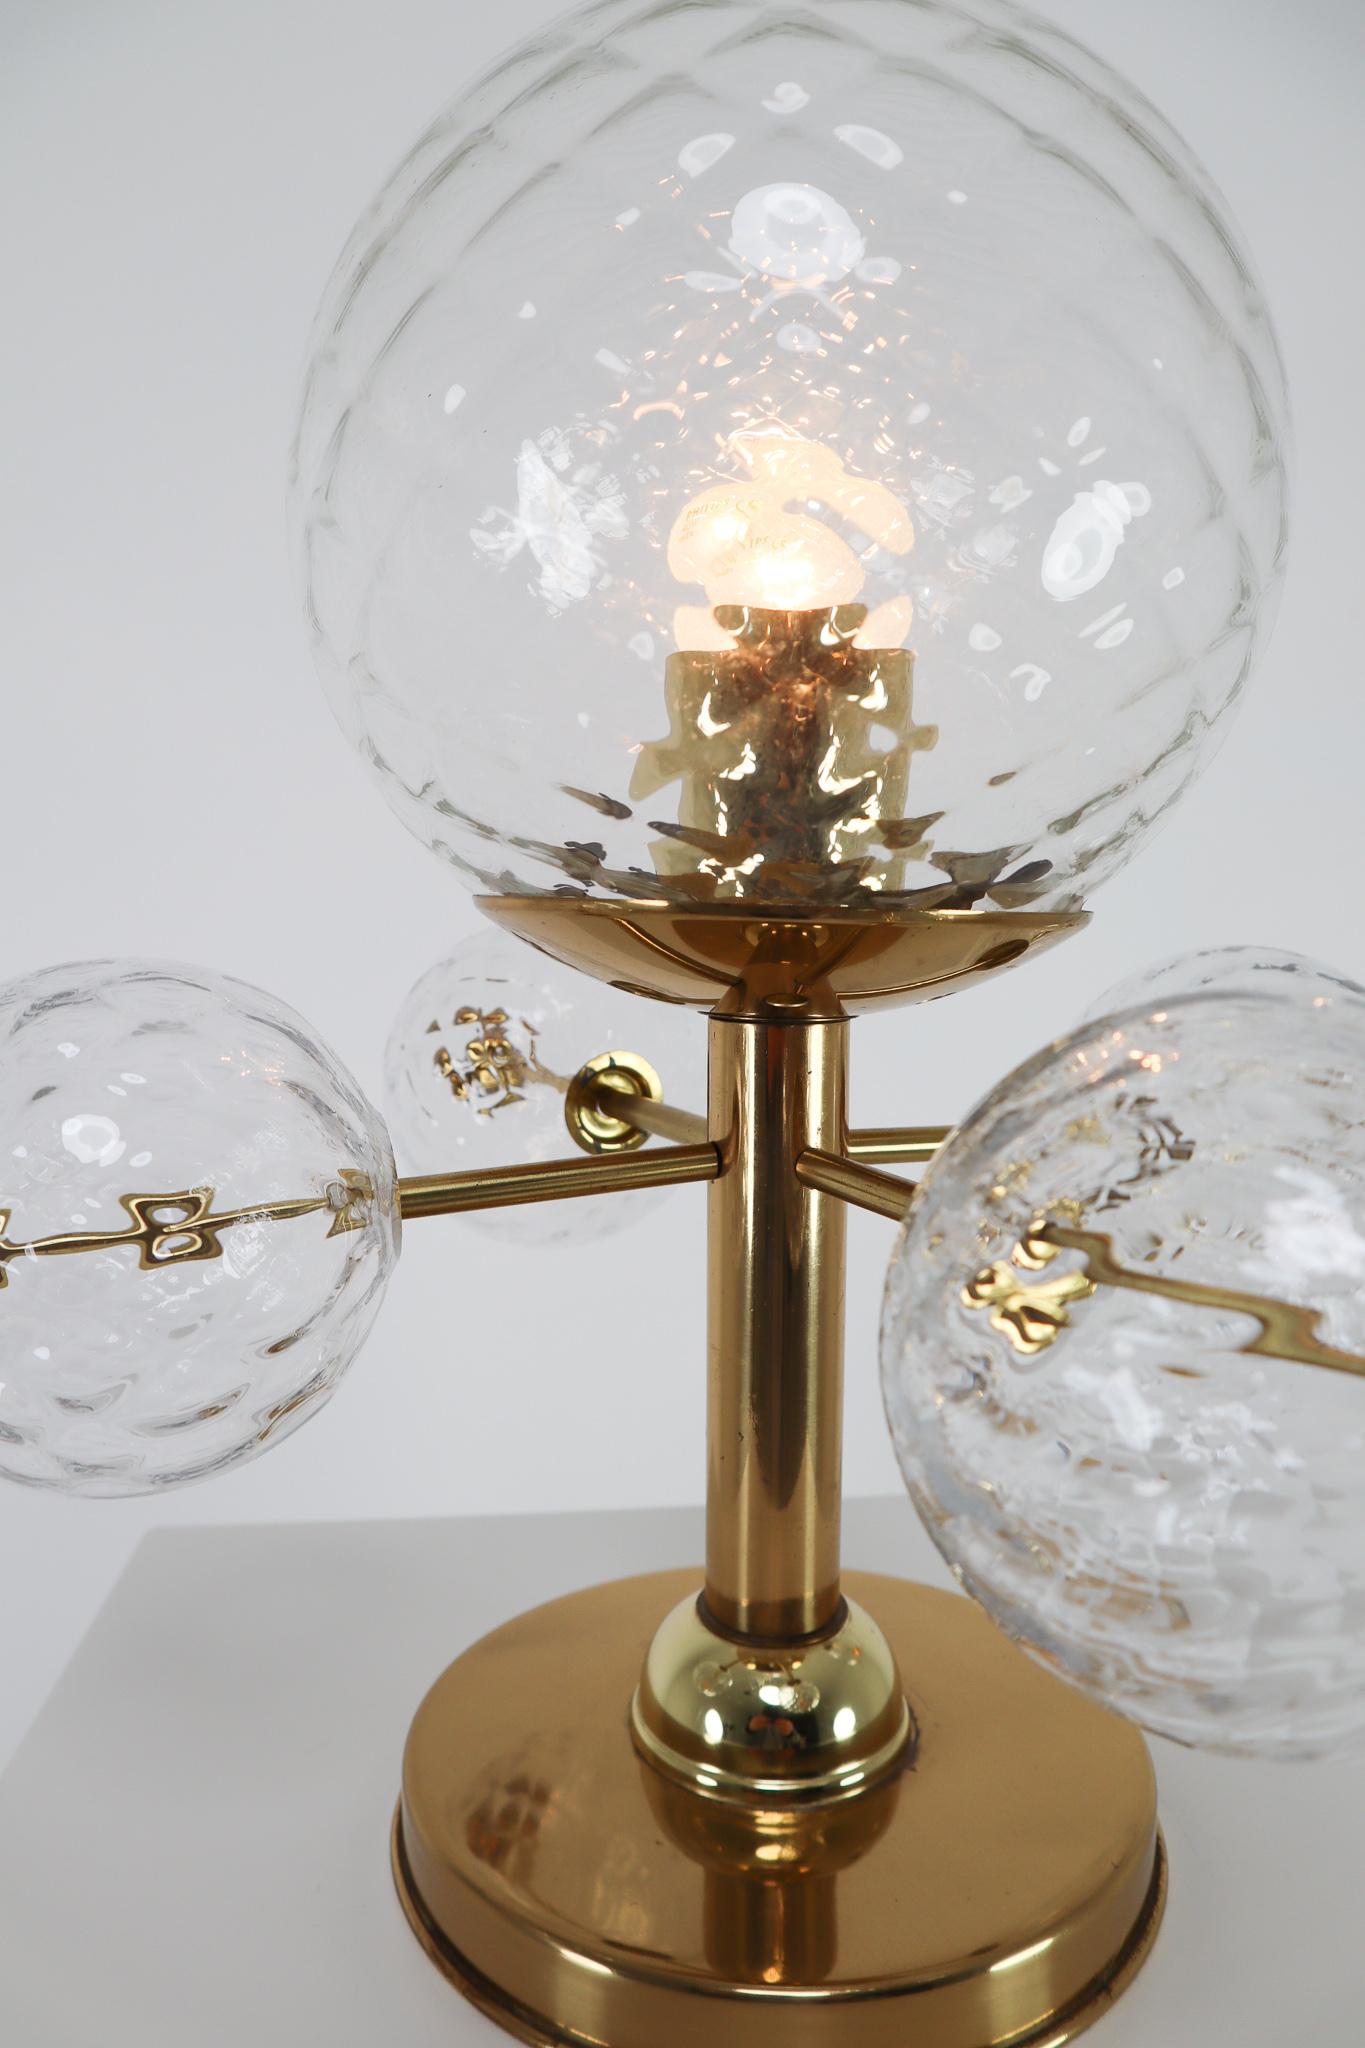 European Midcentury Table Lamp with Brass Fixture and Structured Glass, Europe, 1970s For Sale